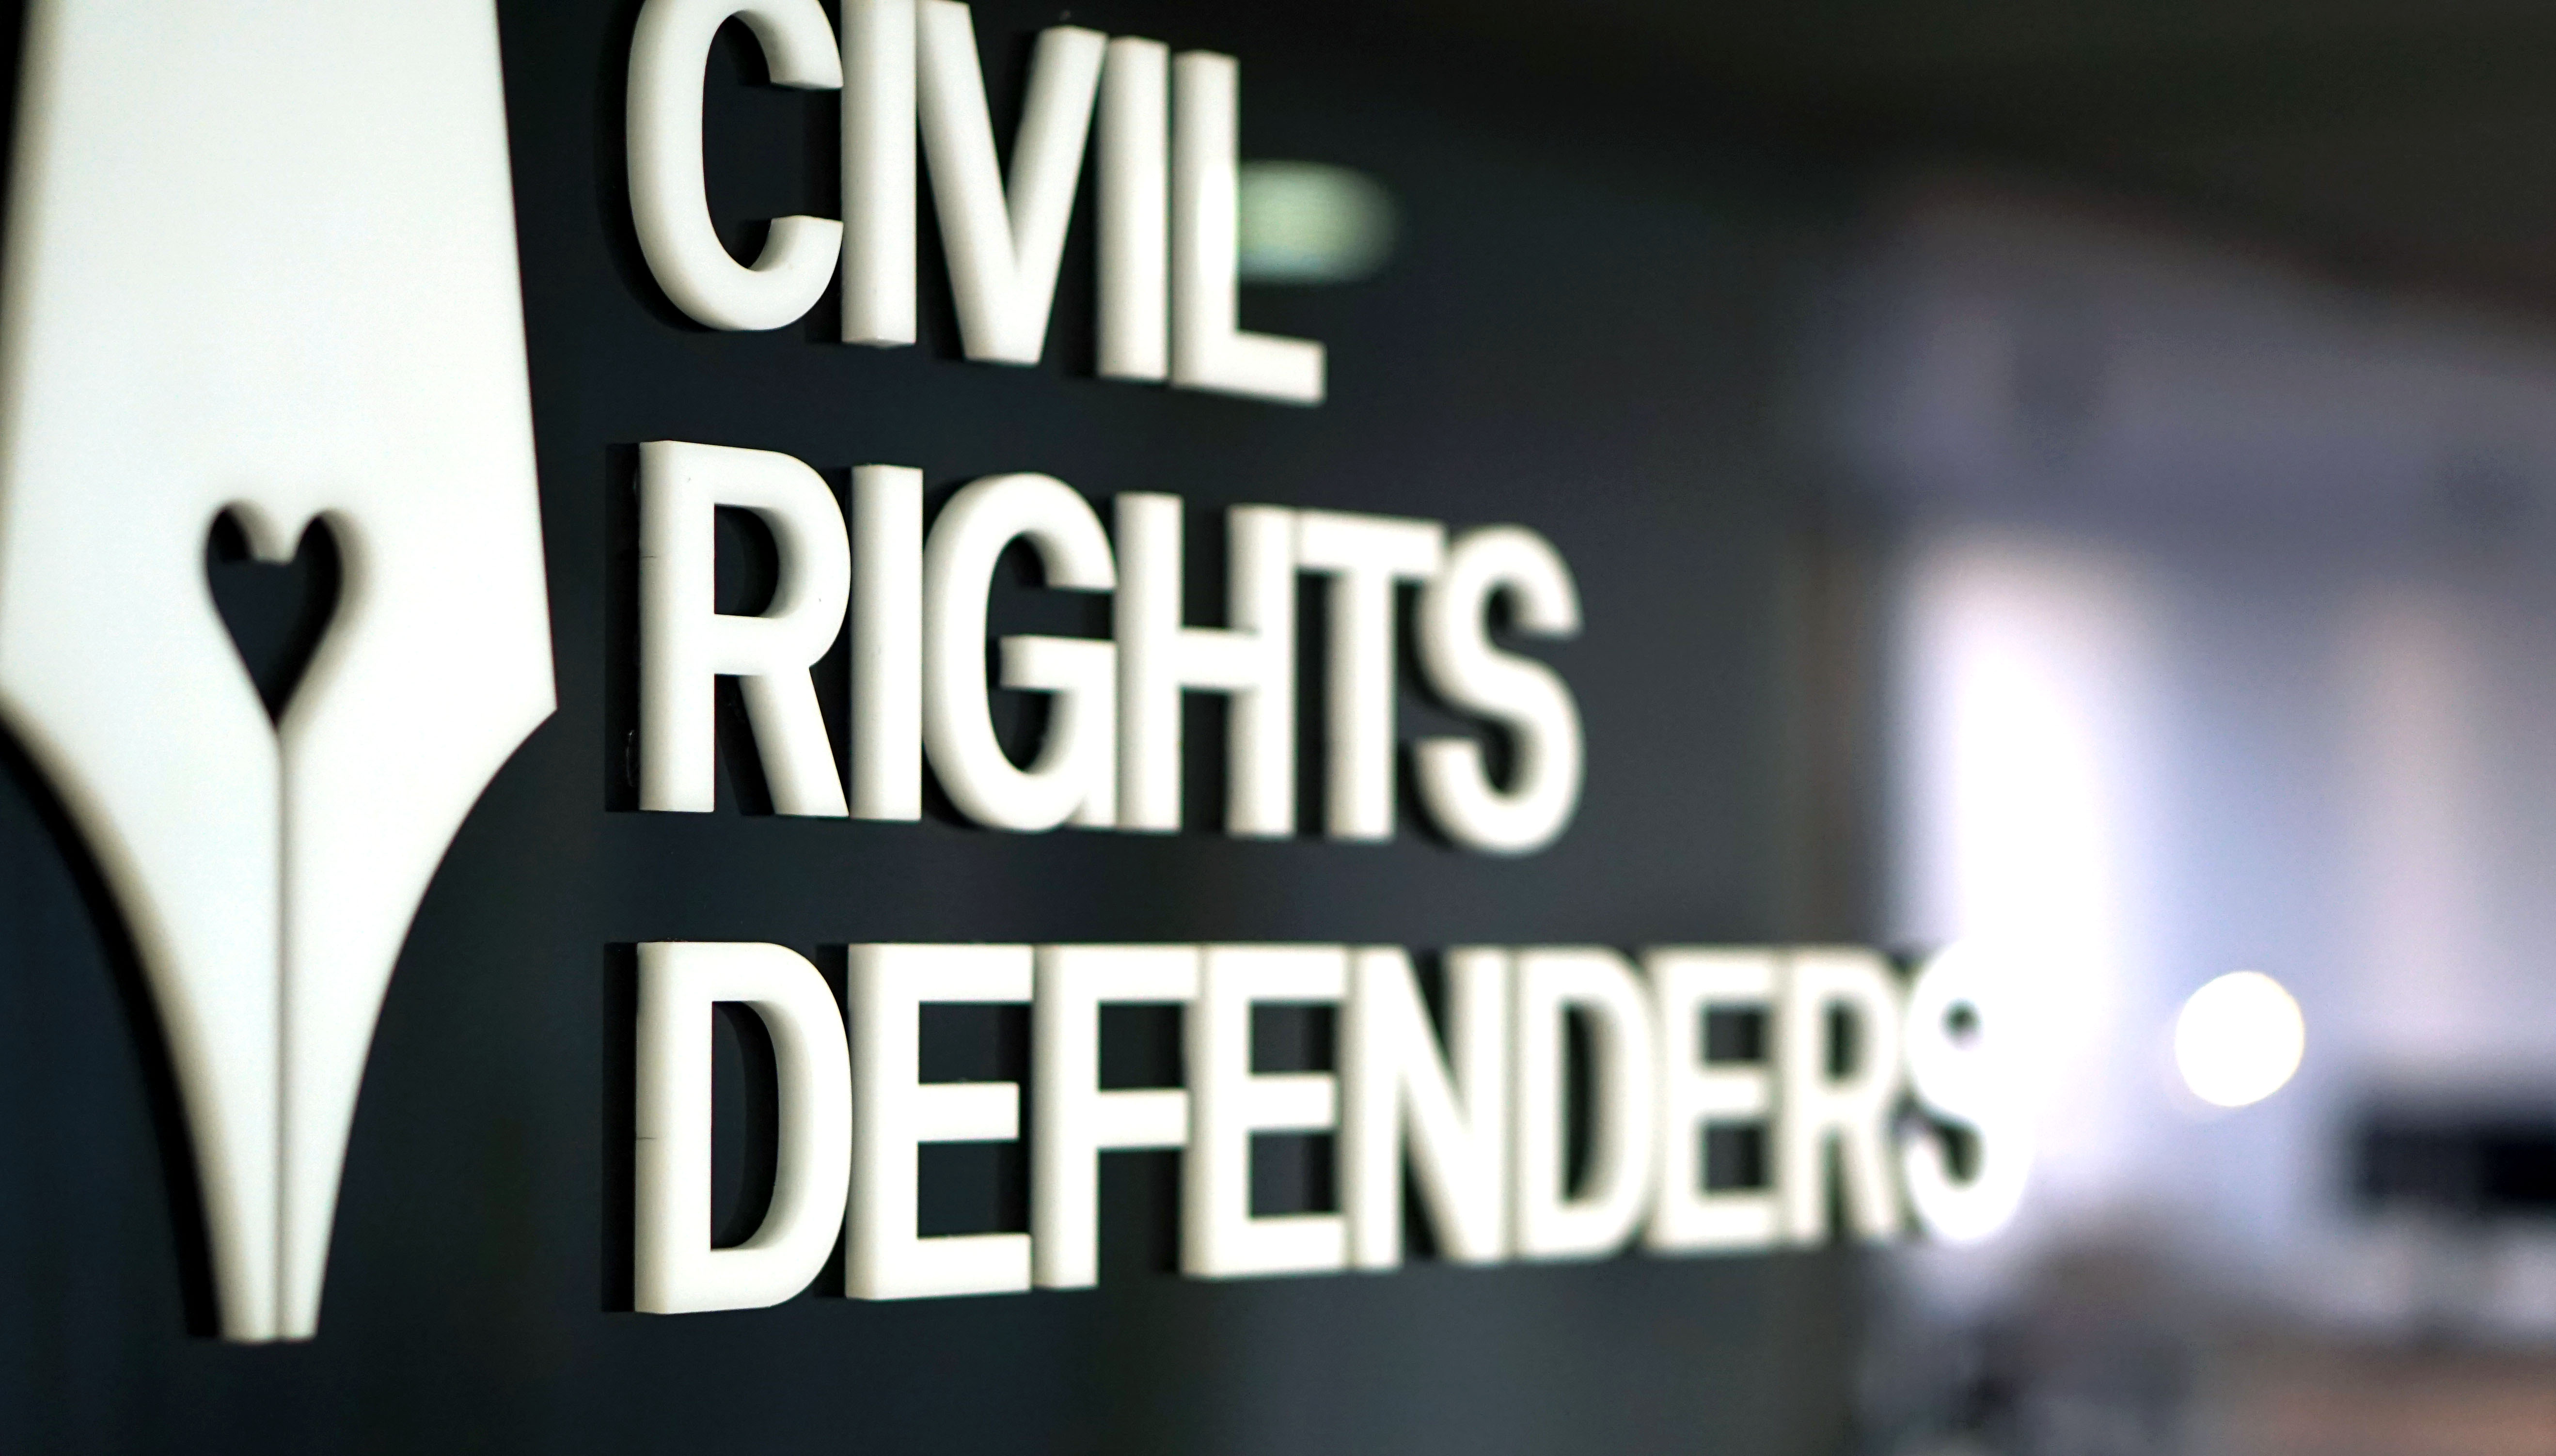 An image of Civil Rights Defenders logotype